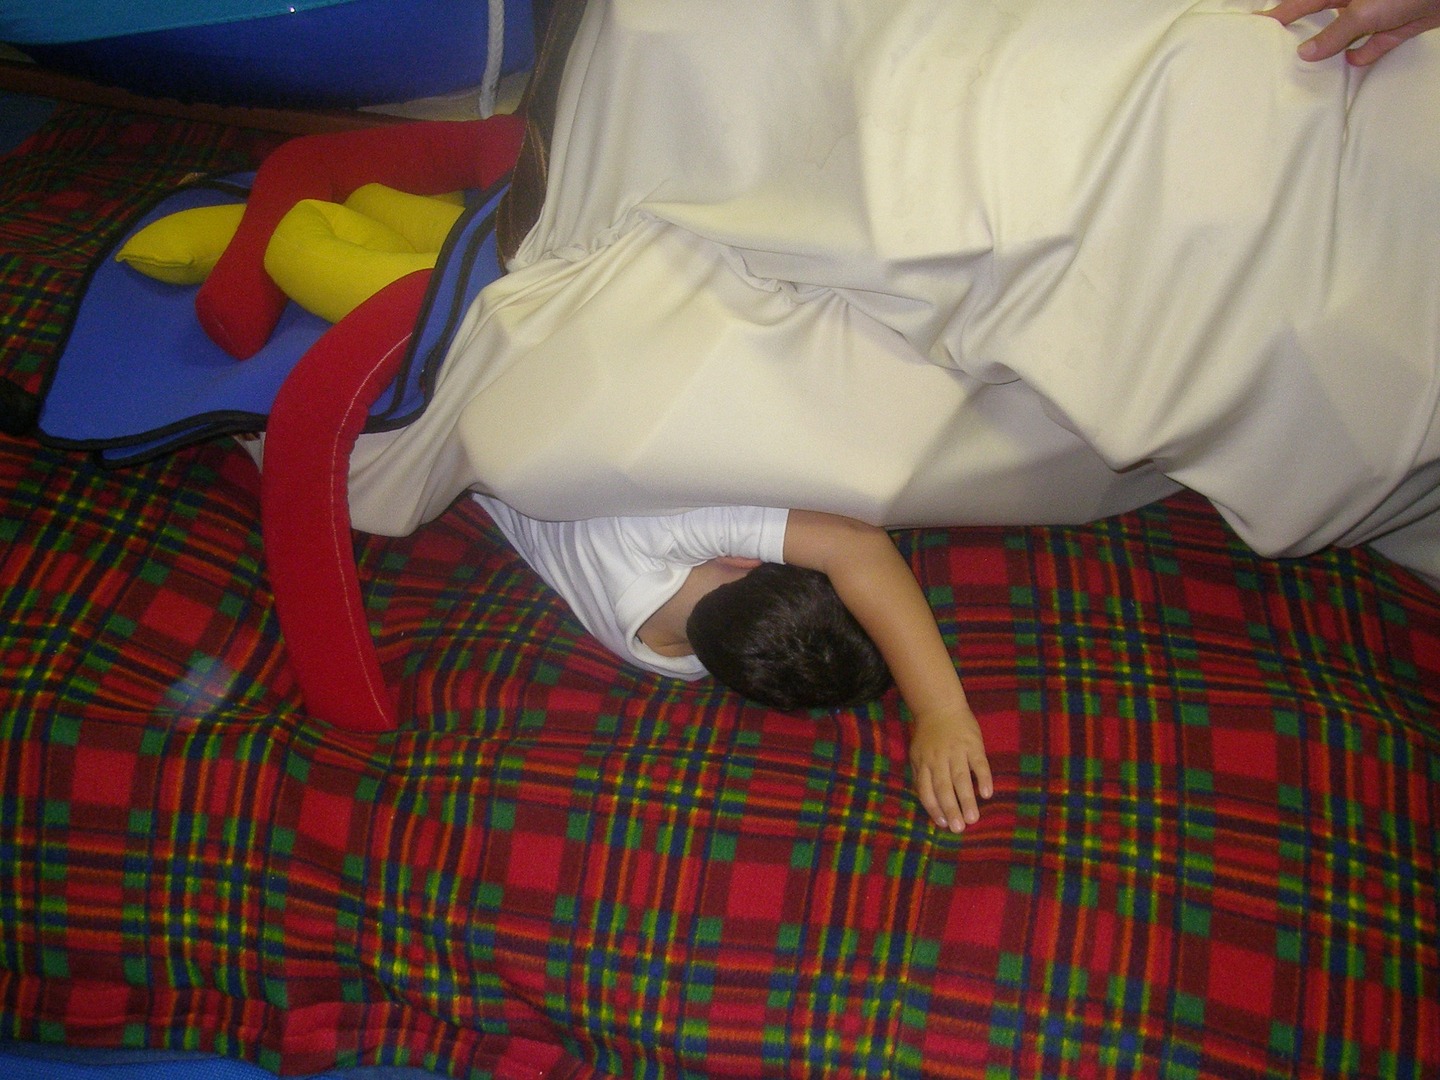 A child is laying on the bed under sheets.